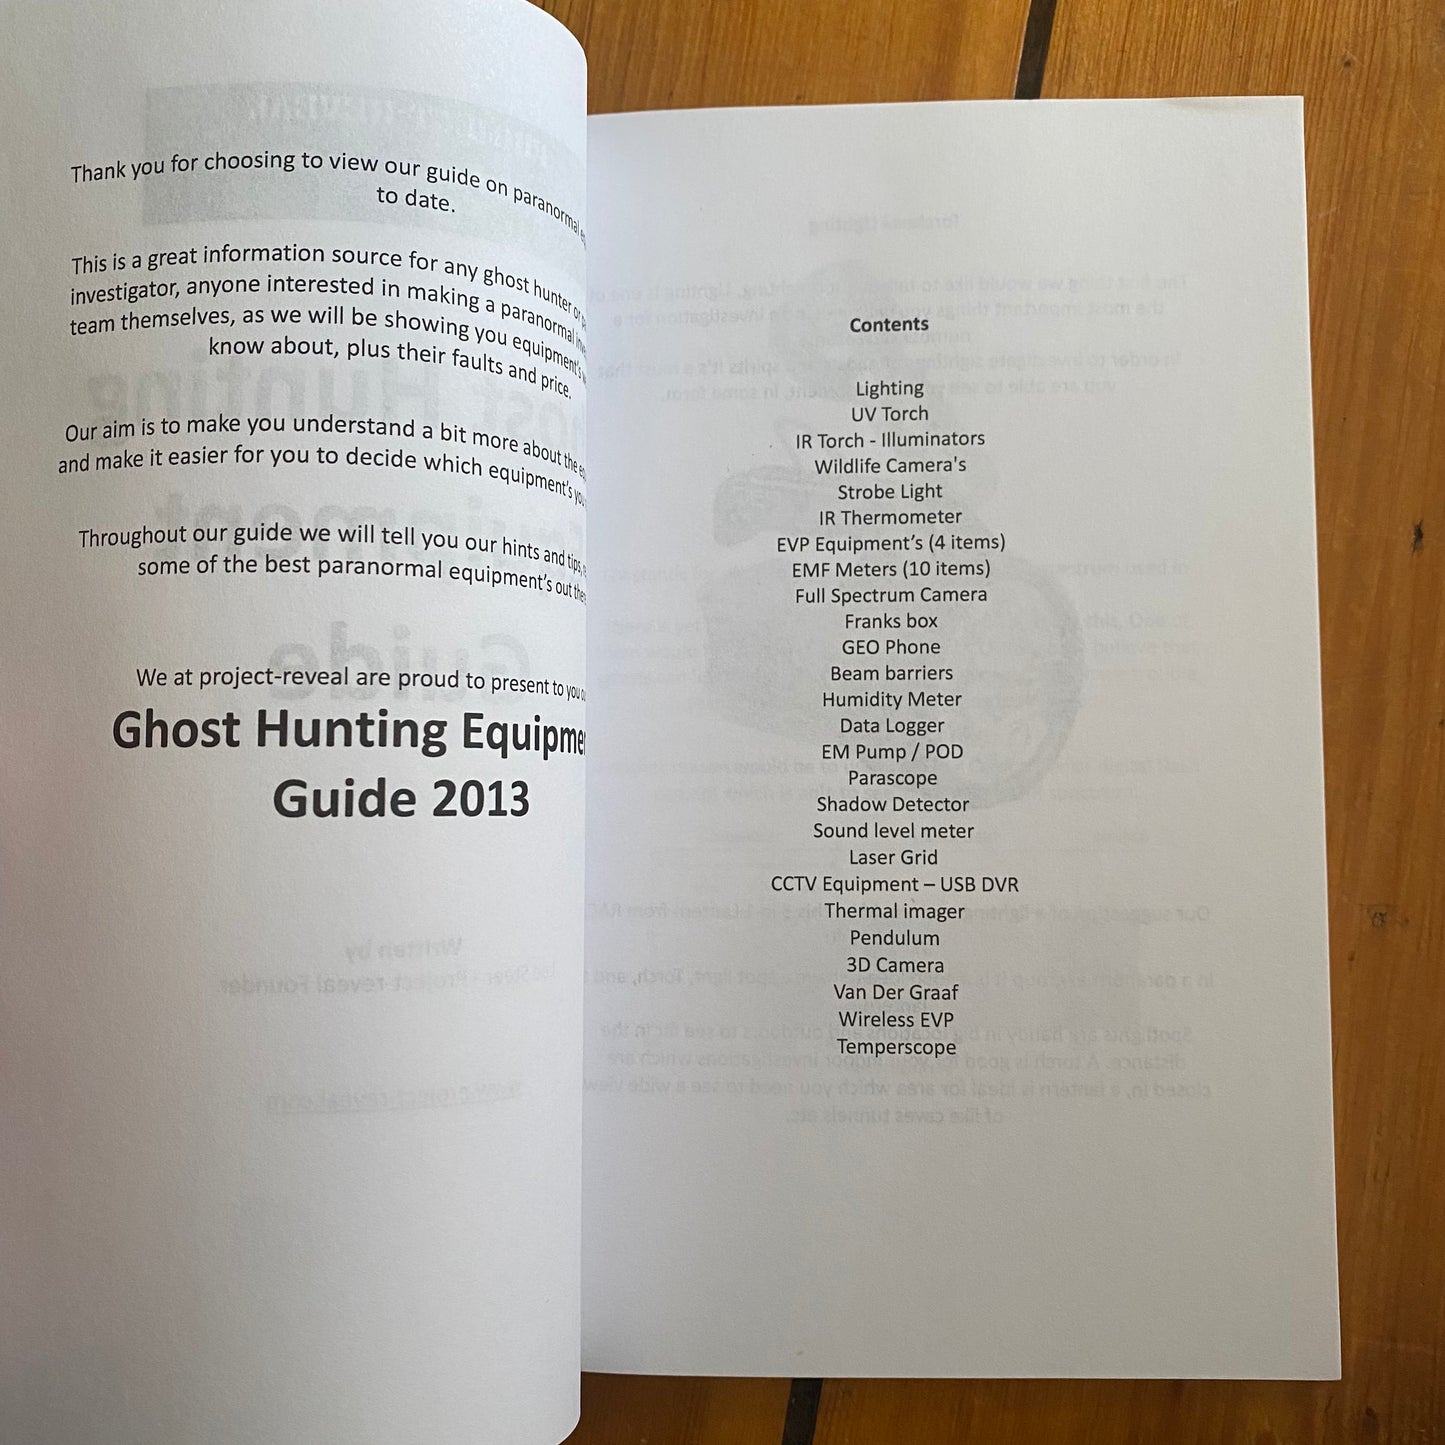 Ghost Hunting Equipment Guide: The Paranormal Equipment Guide. by Project-reveal Lee Steer